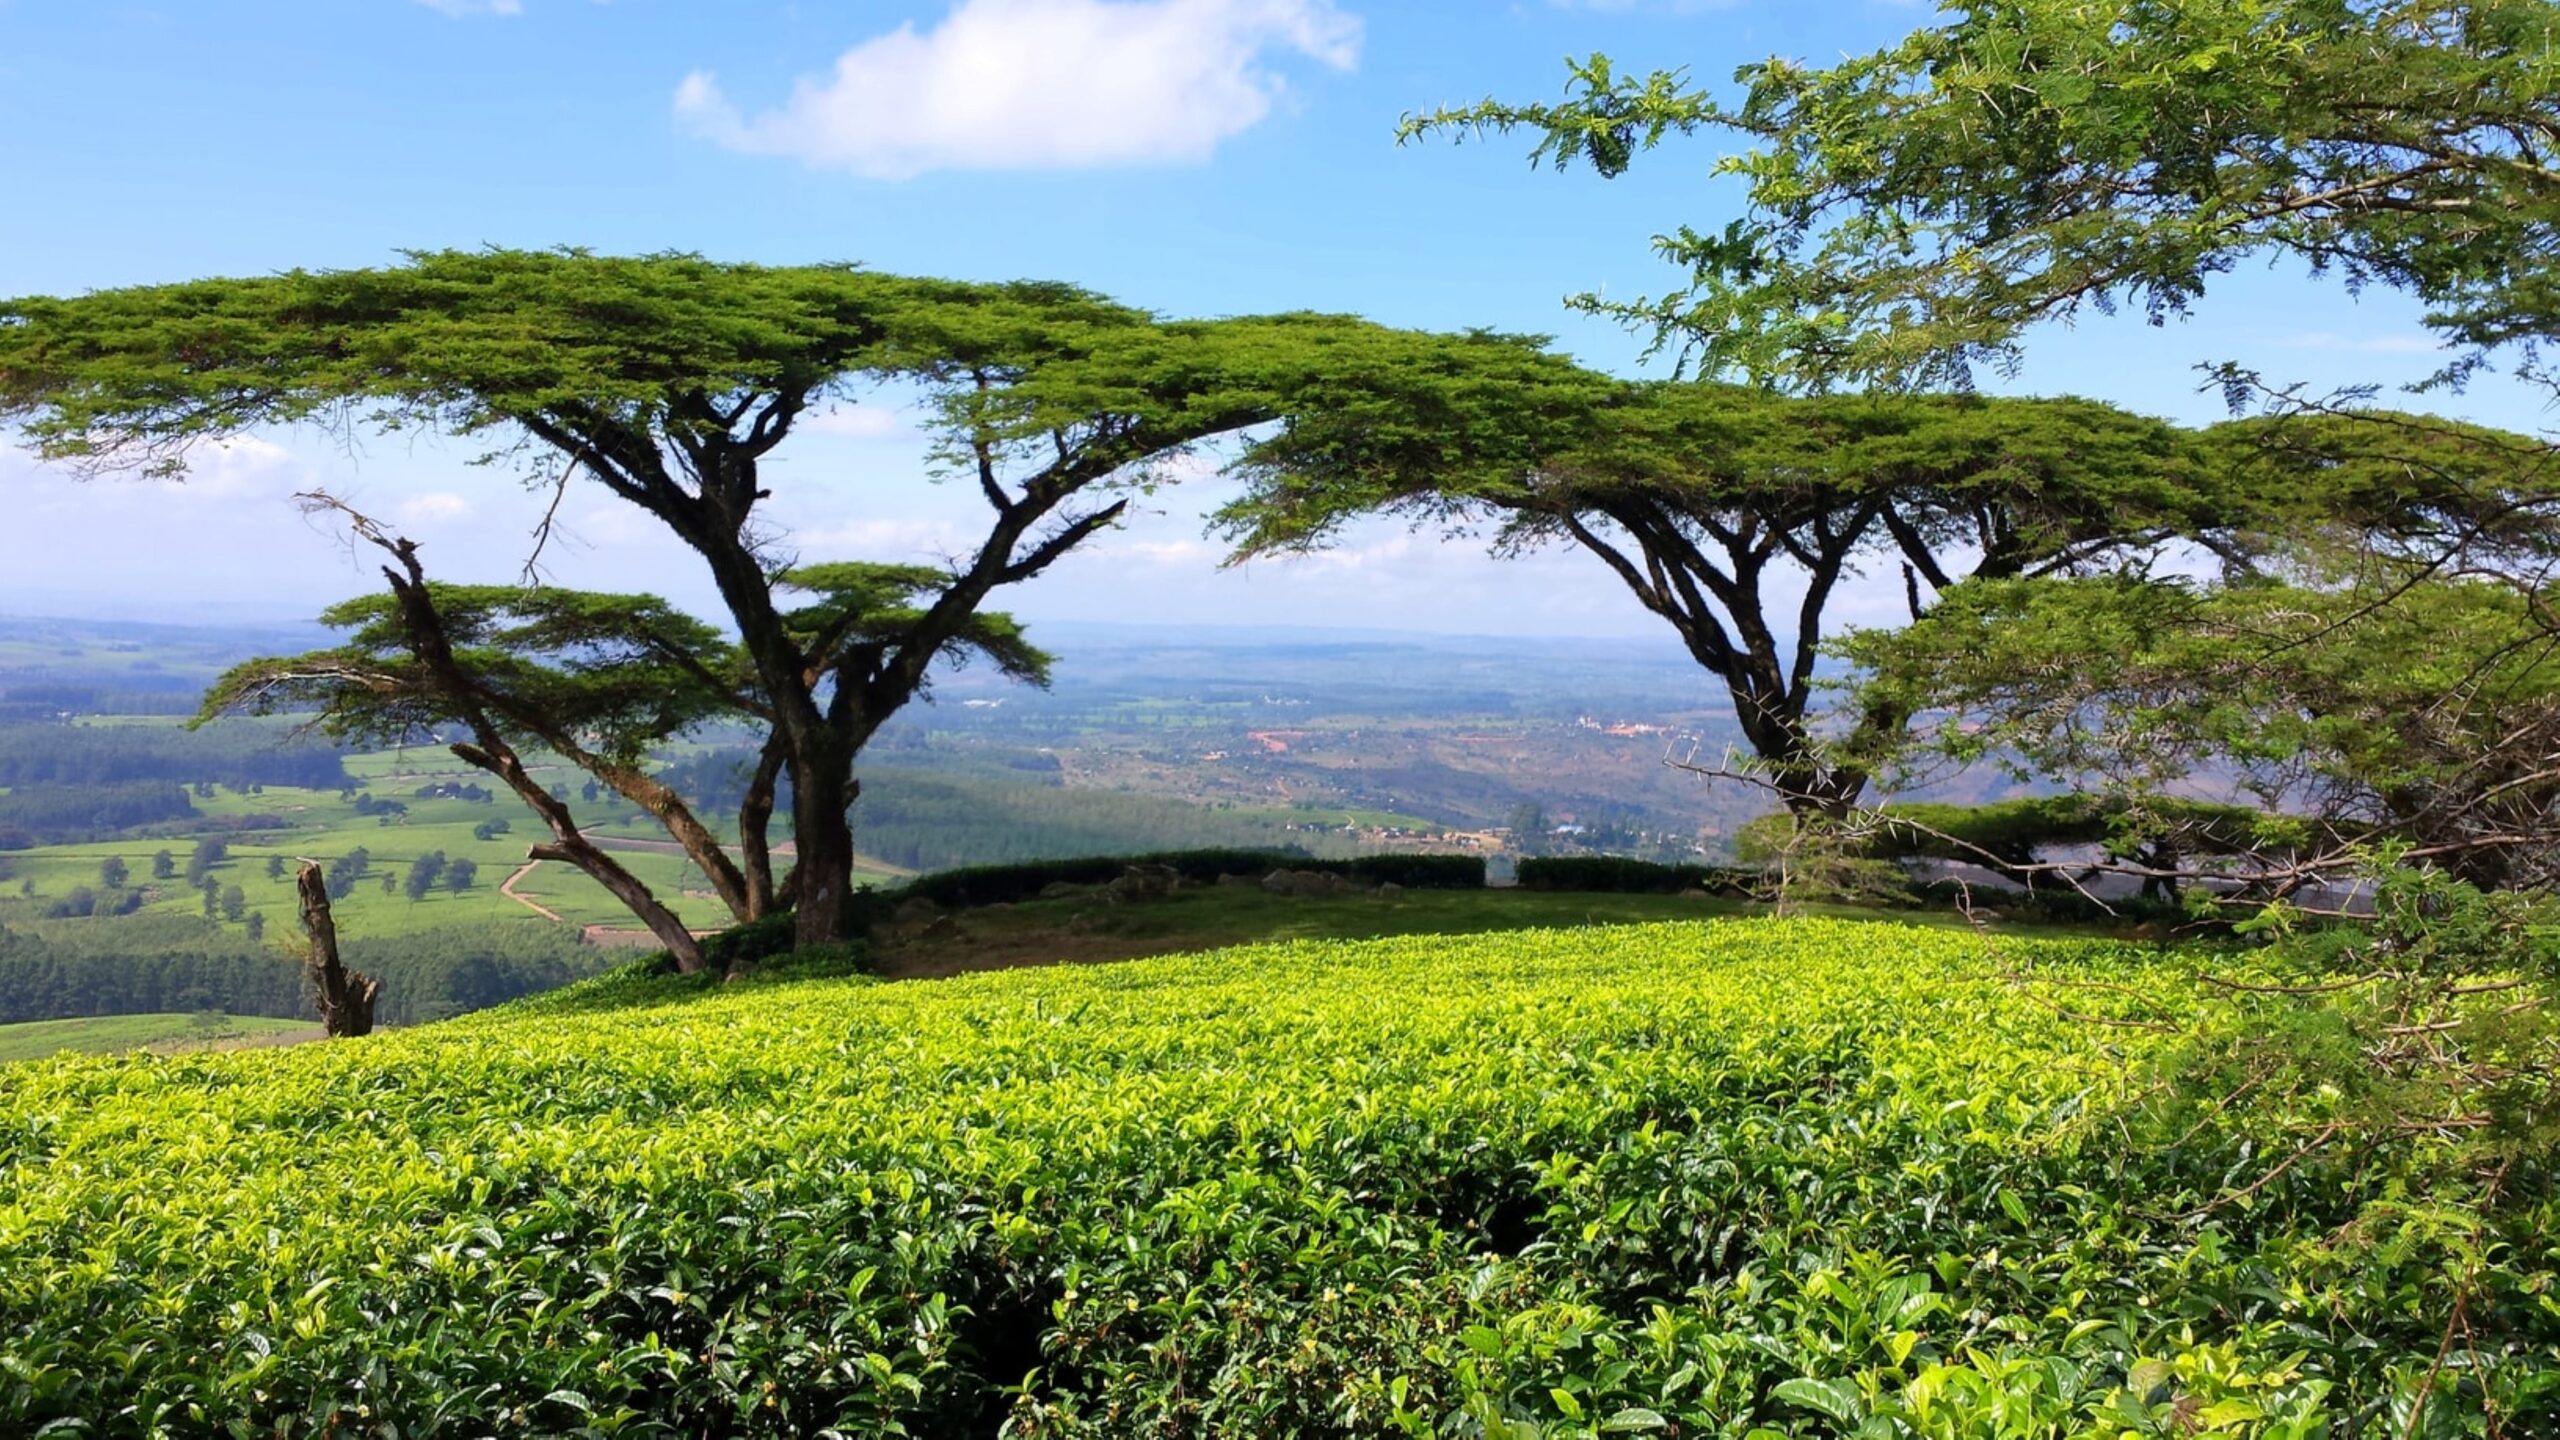 Acacia Abyssinica trees, Tea Plantation, Malawi, Africa by Craig Manners